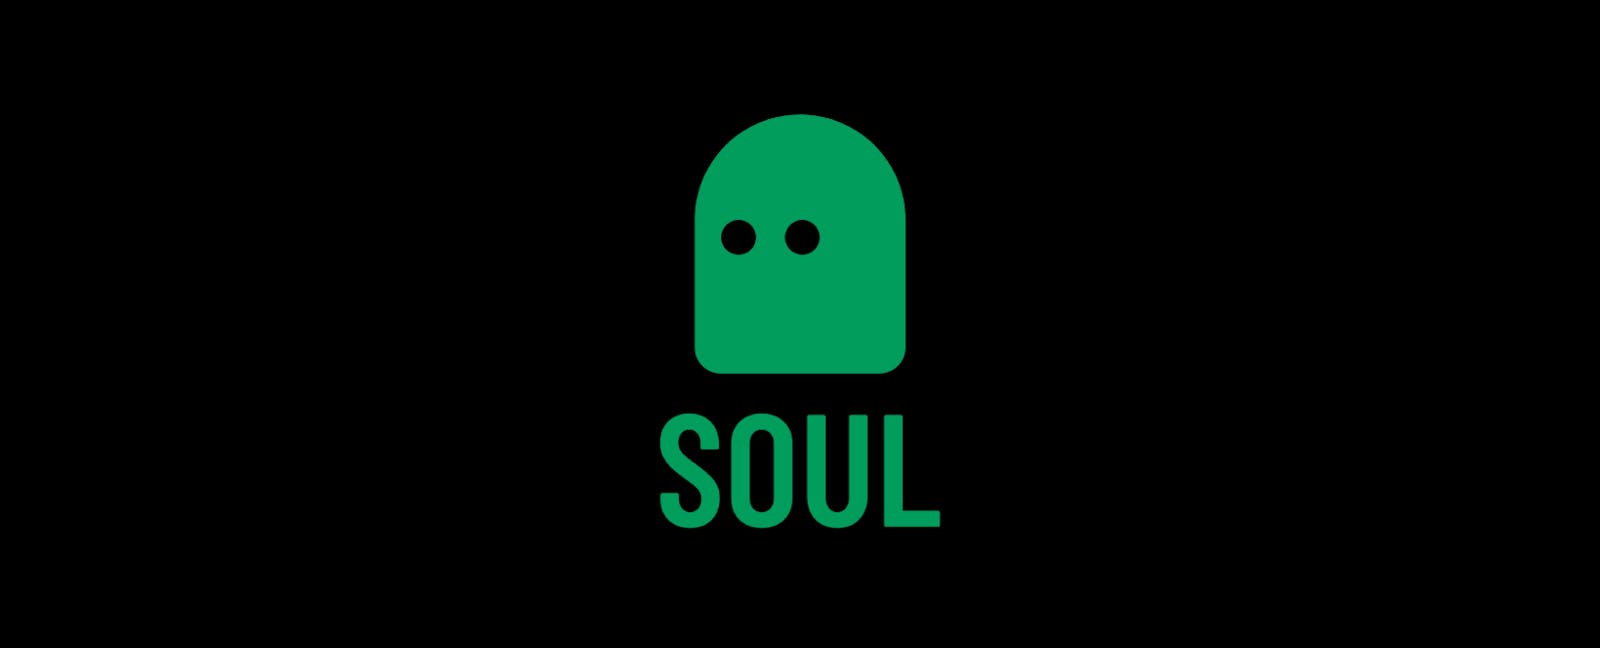 "Soul", SQLite REST and realtime server is now extendable.